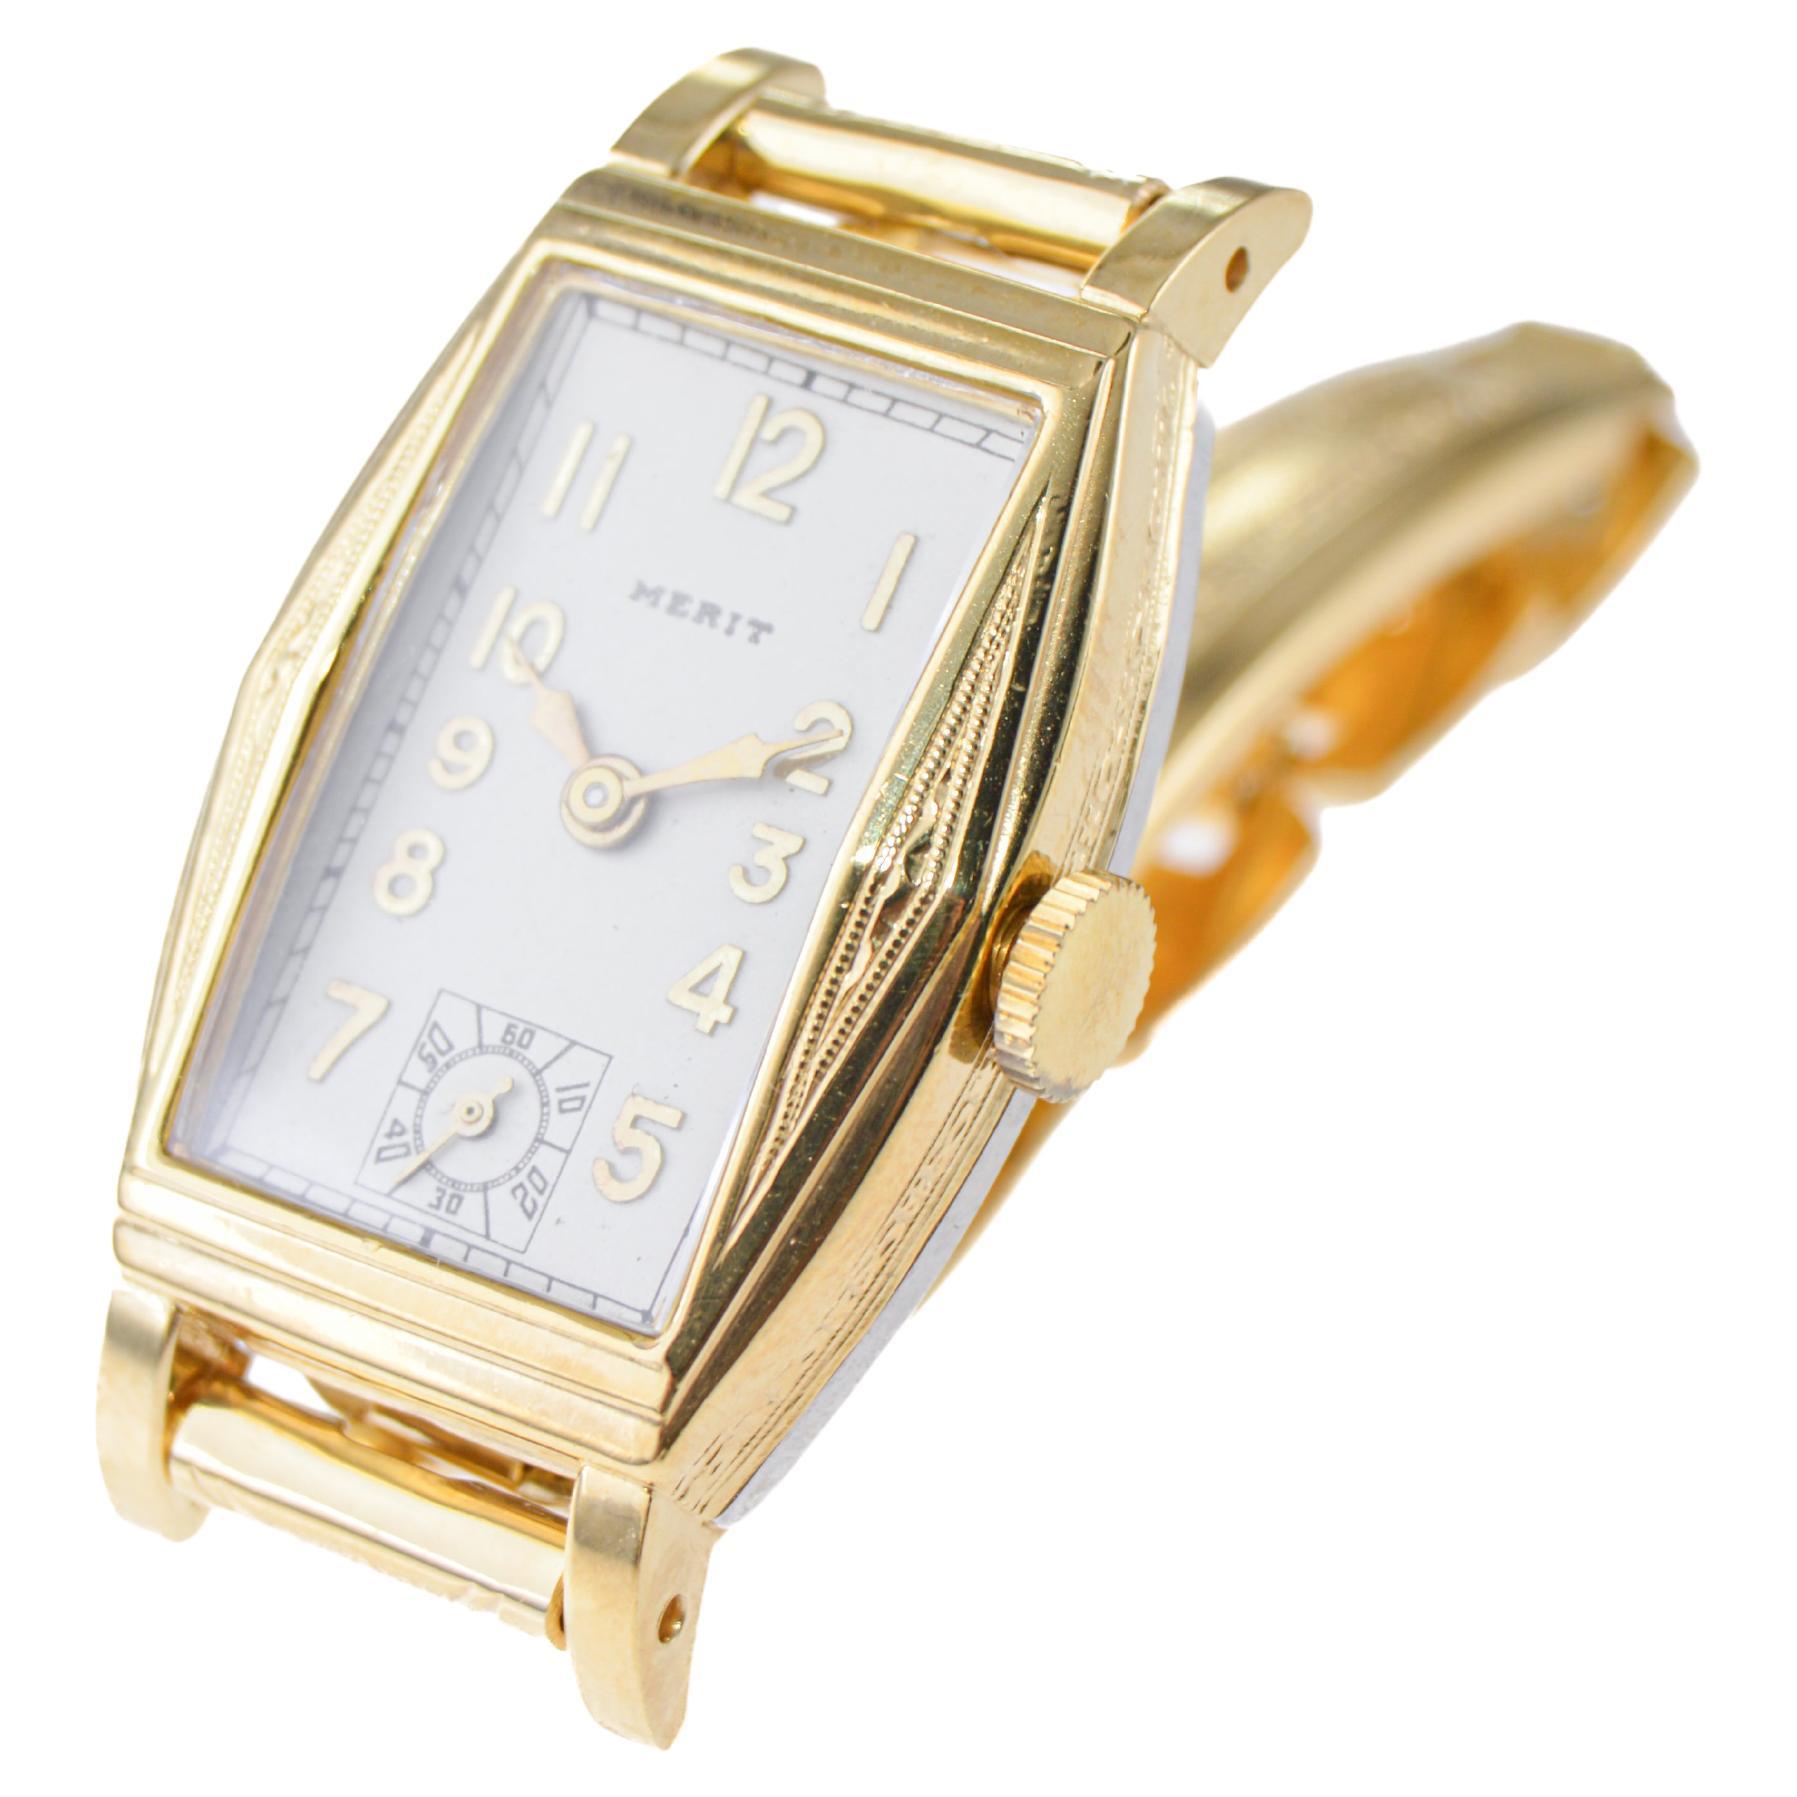 Merit Gold-Filled Art Deco Watch with Original Matching Bracelet circa 1940's In Excellent Condition For Sale In Long Beach, CA